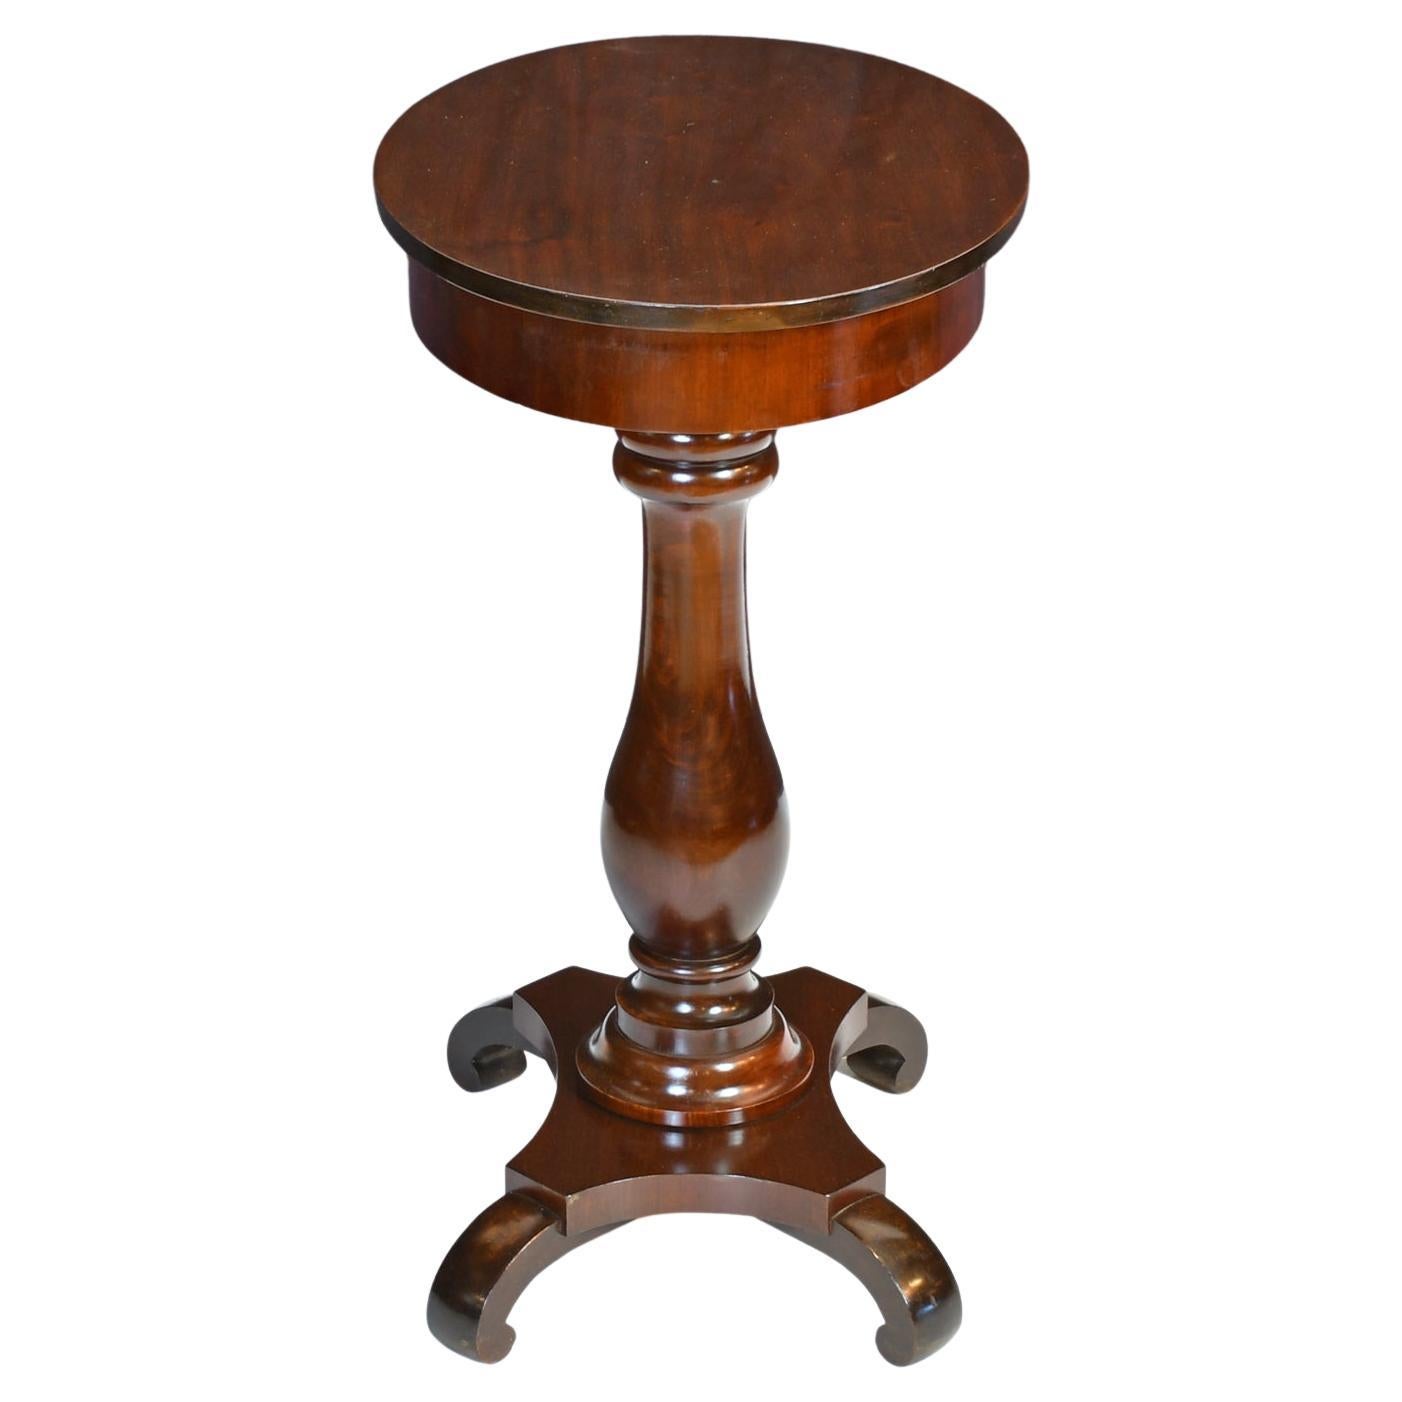 Small Antique Oval Pedestal Table or Work Table in Dark-Stained Mahogany For Sale 2